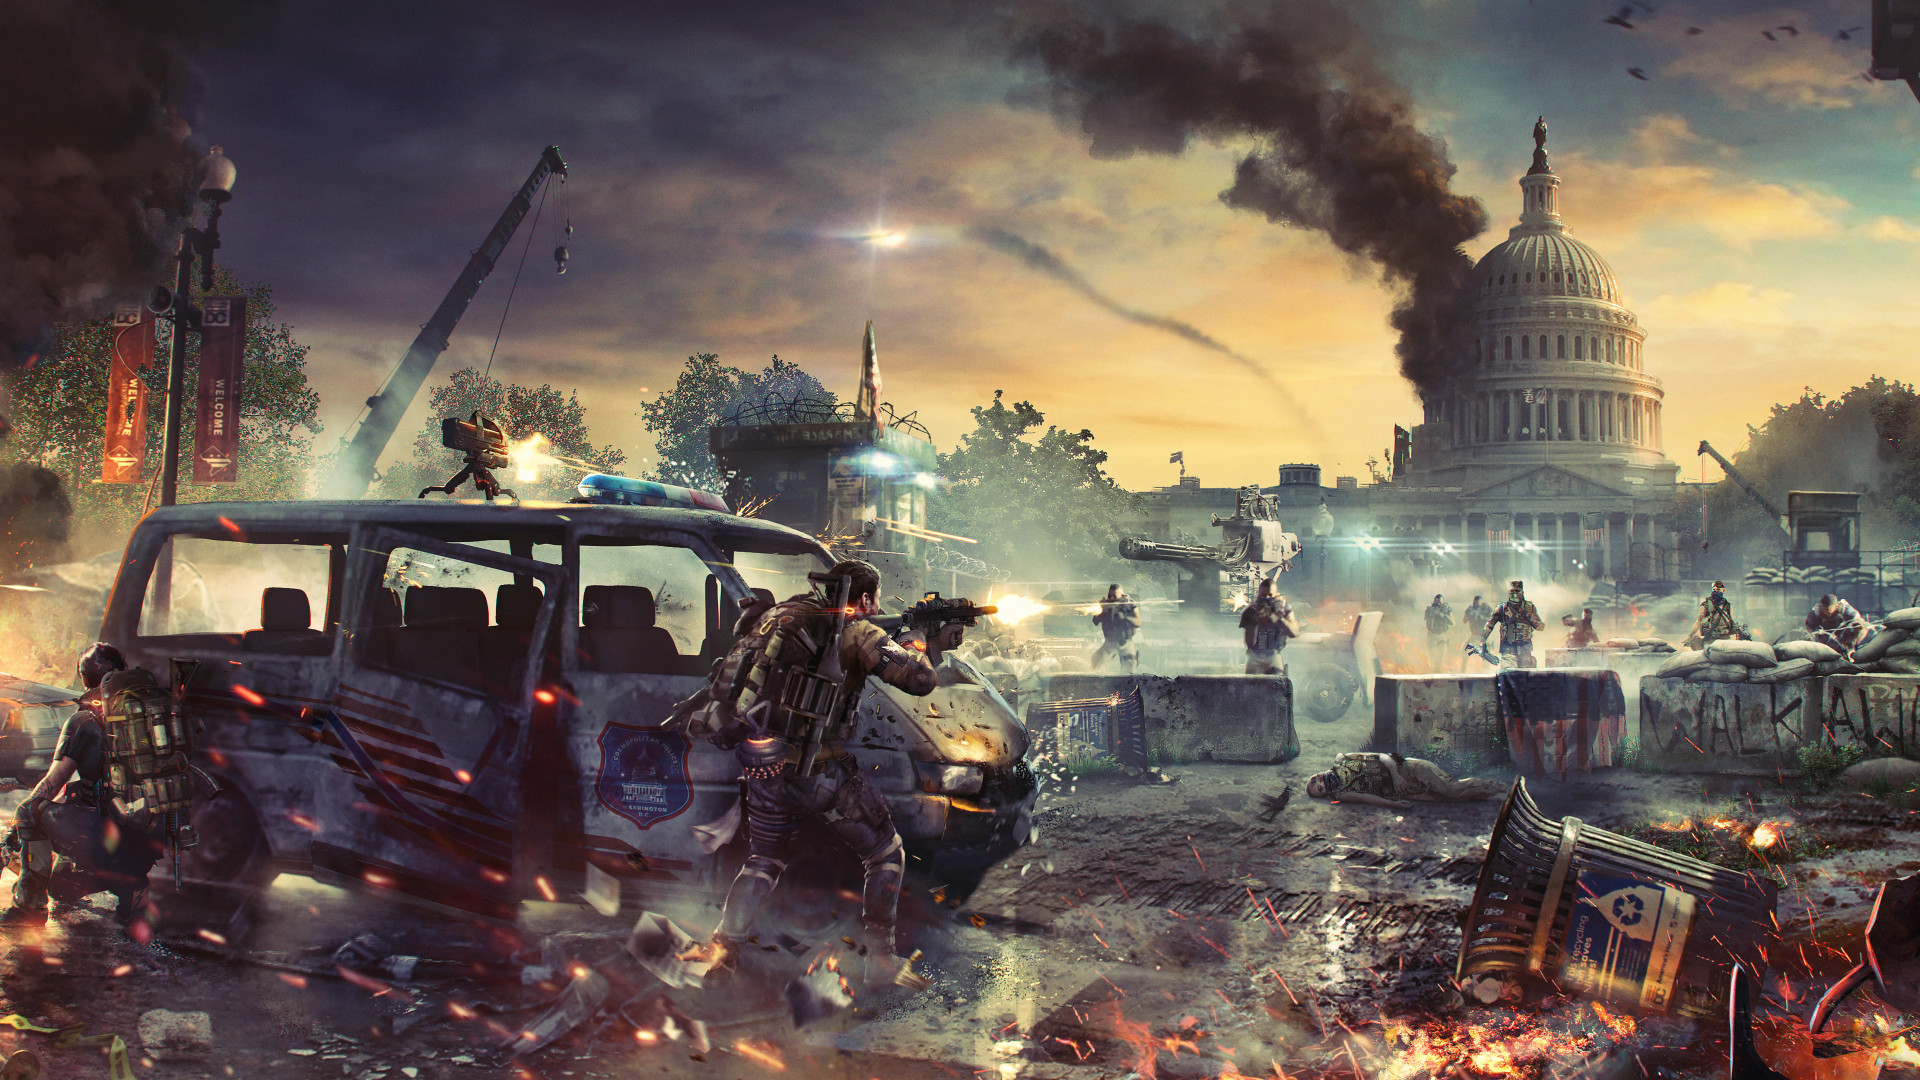 1920x1080 Tom Clancy's The Division 2 Desktop Wallpapers 3